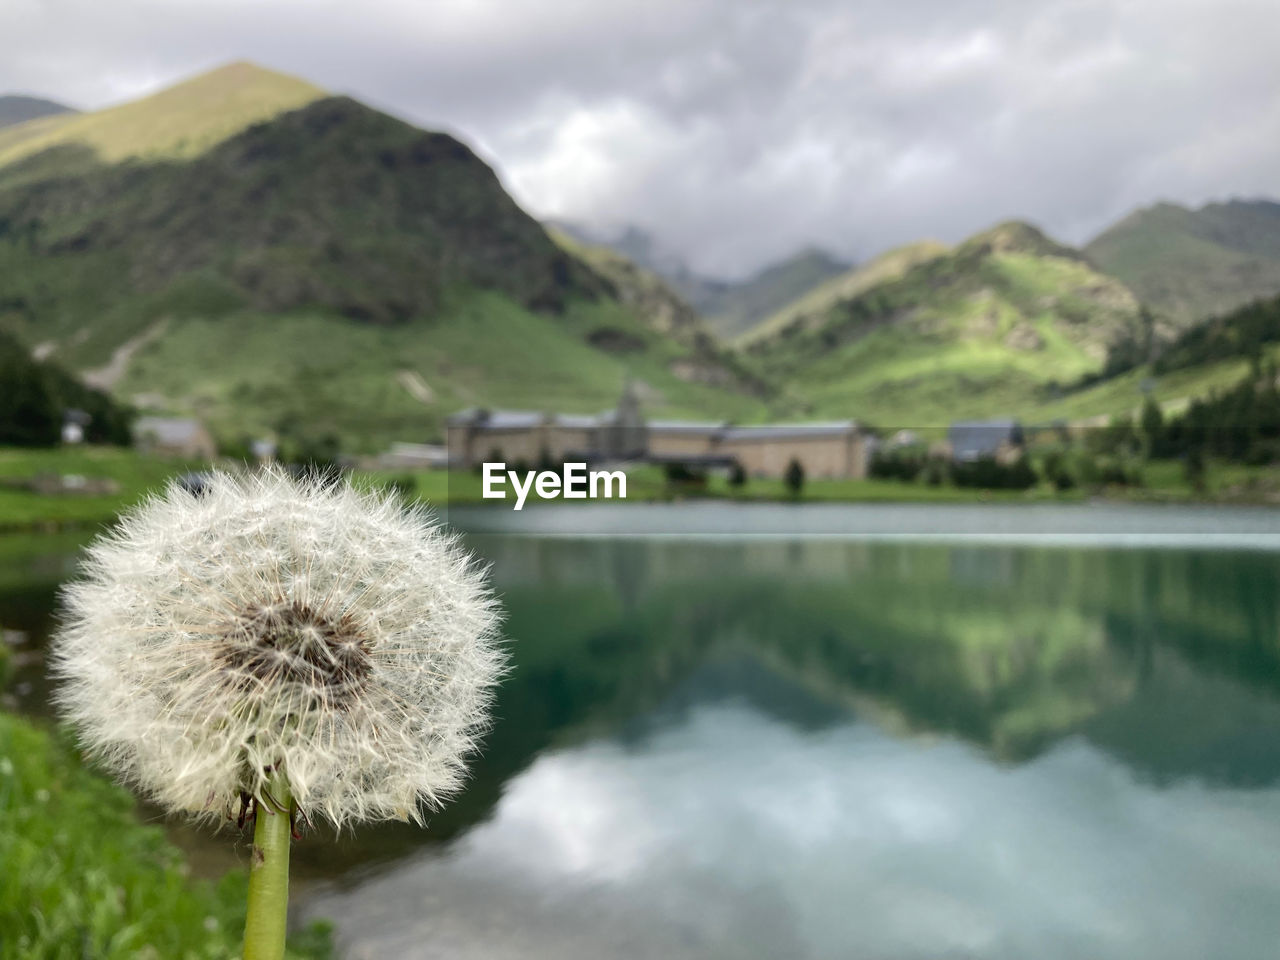 mountain, plant, nature, beauty in nature, water, flower, cloud, environment, flowering plant, scenics - nature, lake, sky, mountain range, no people, landscape, tranquility, freshness, reflection, land, outdoors, day, tranquil scene, dandelion, focus on foreground, travel destinations, wildflower, close-up